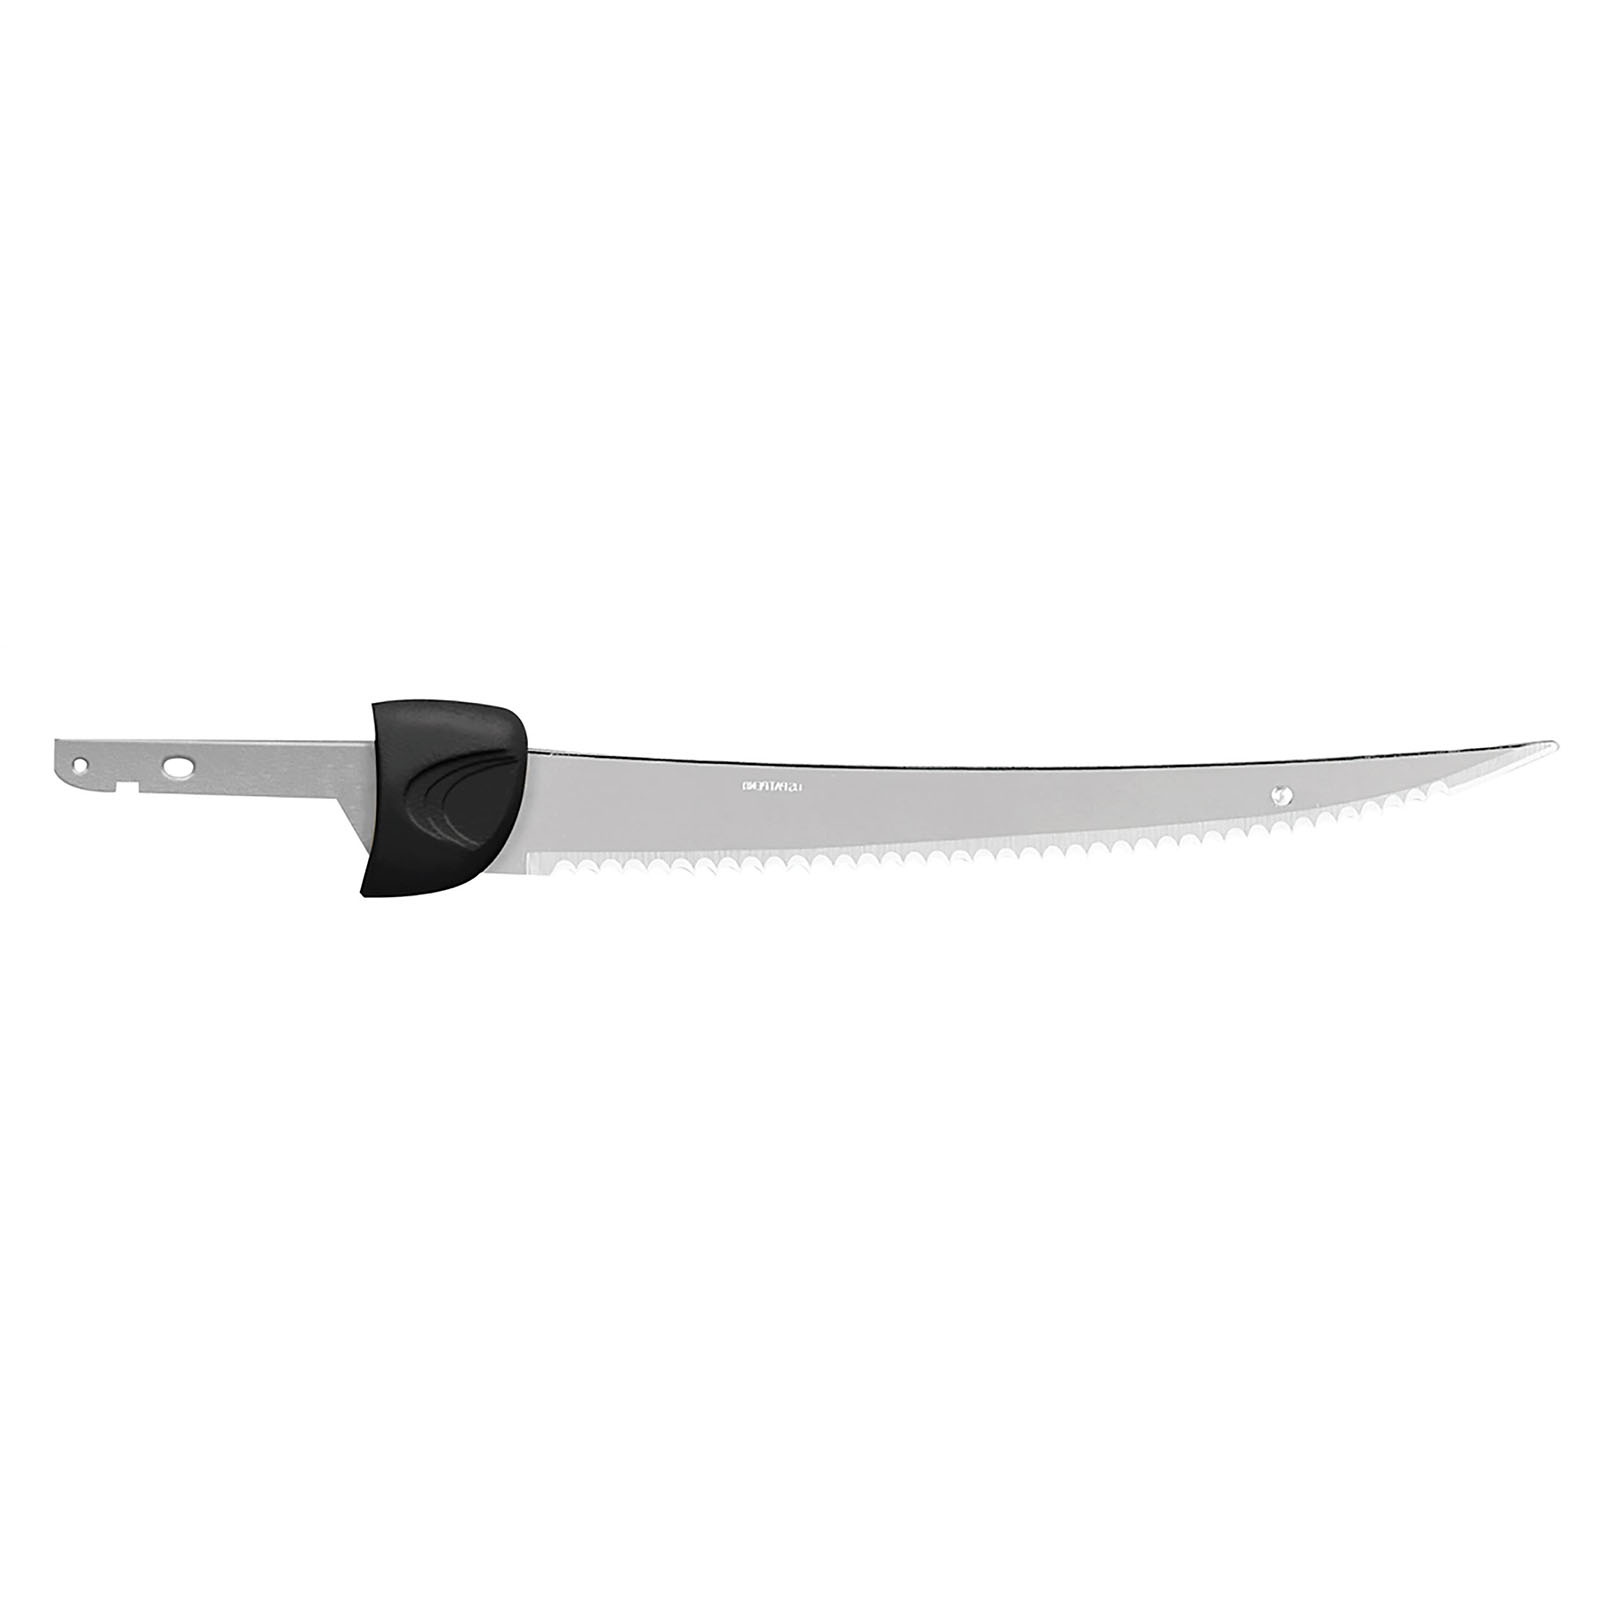 American Angler PRO Electric Fillet Knife, Stainless Steel